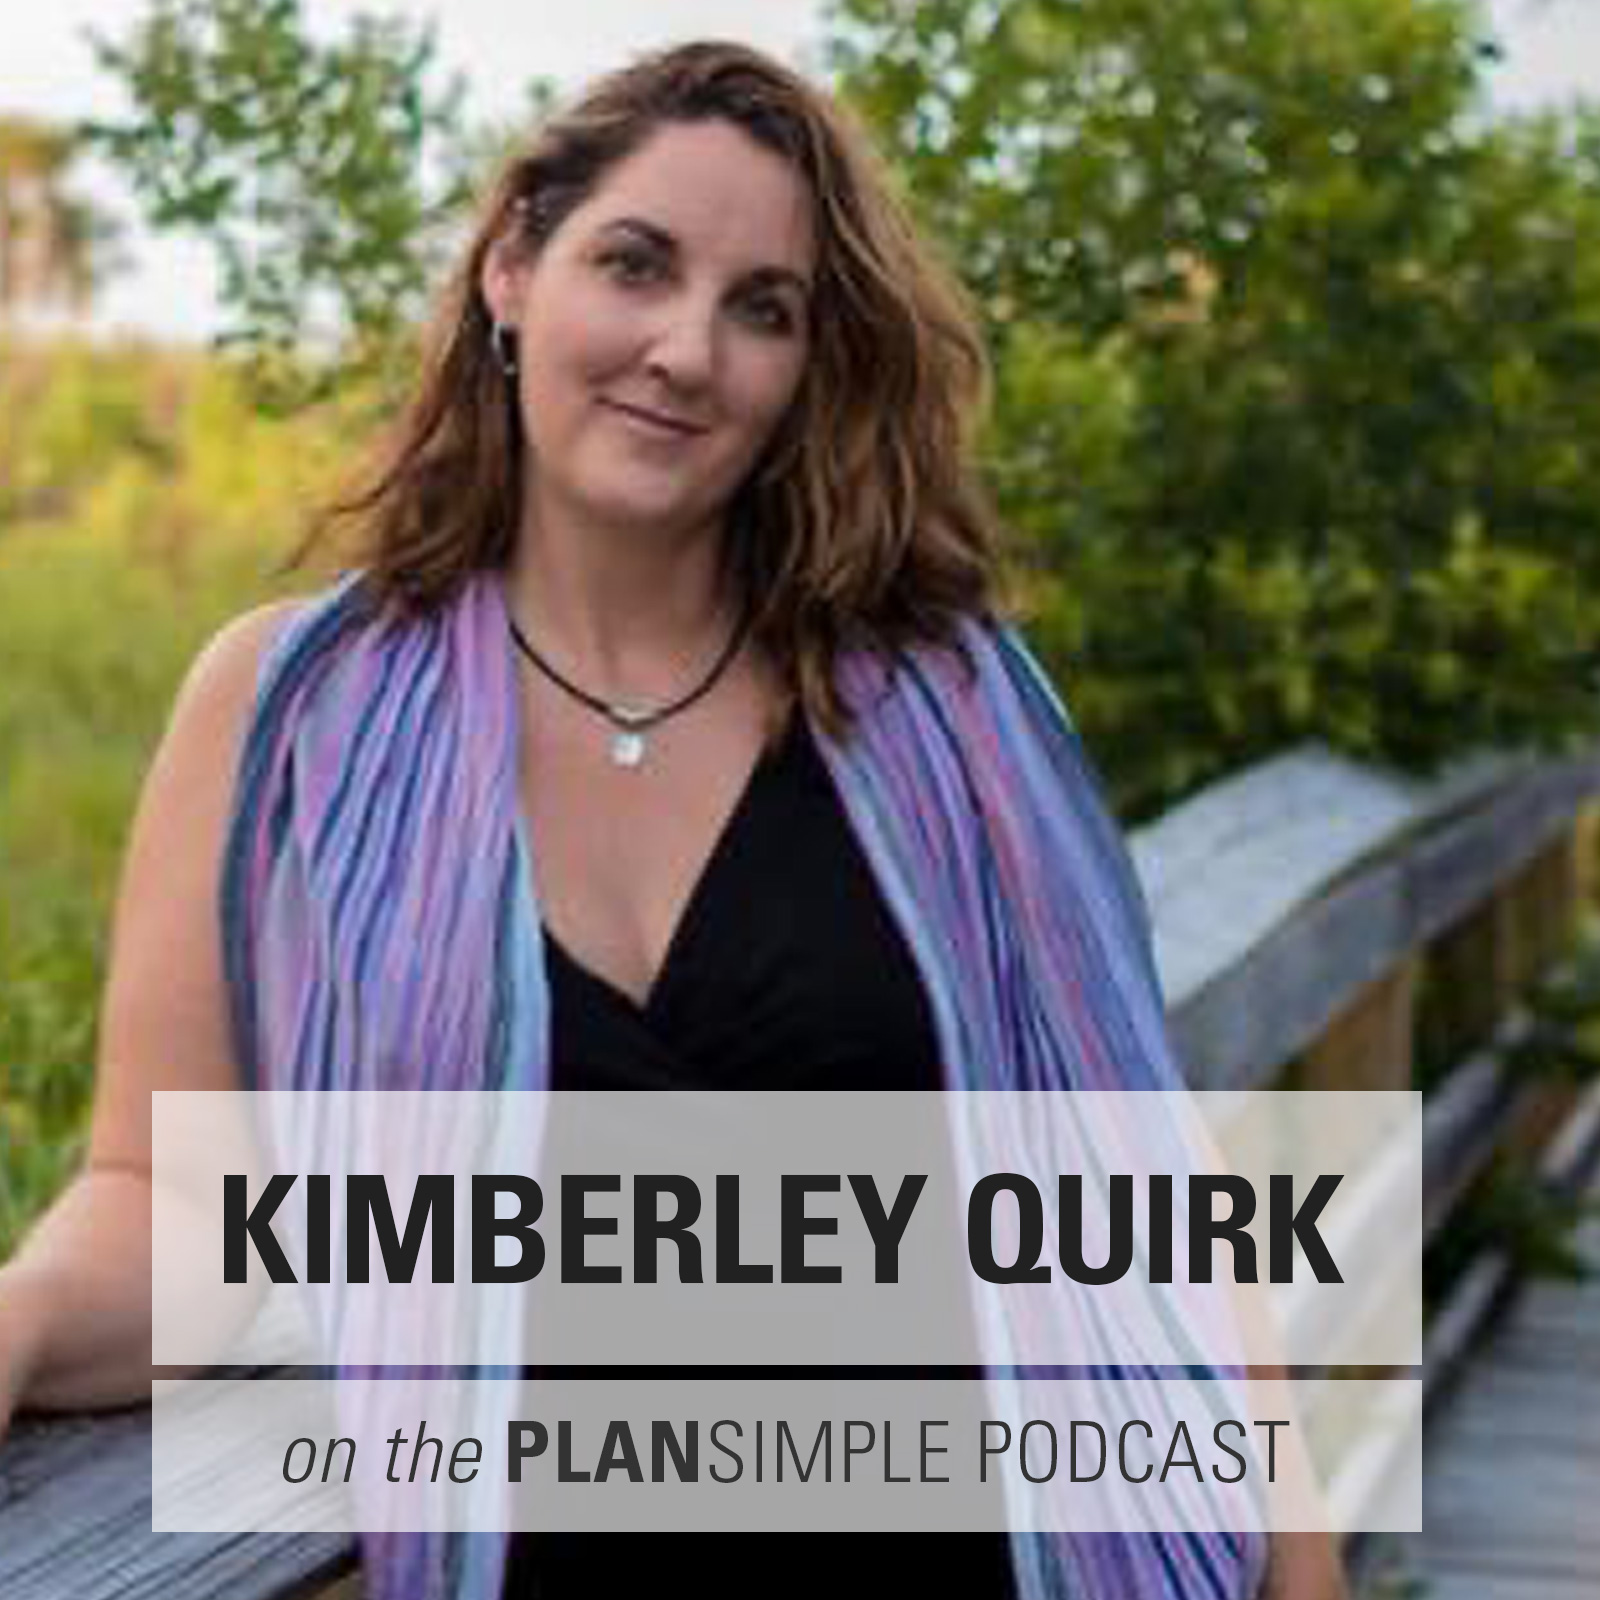 Making Time To Heal With Kimberly Quirk